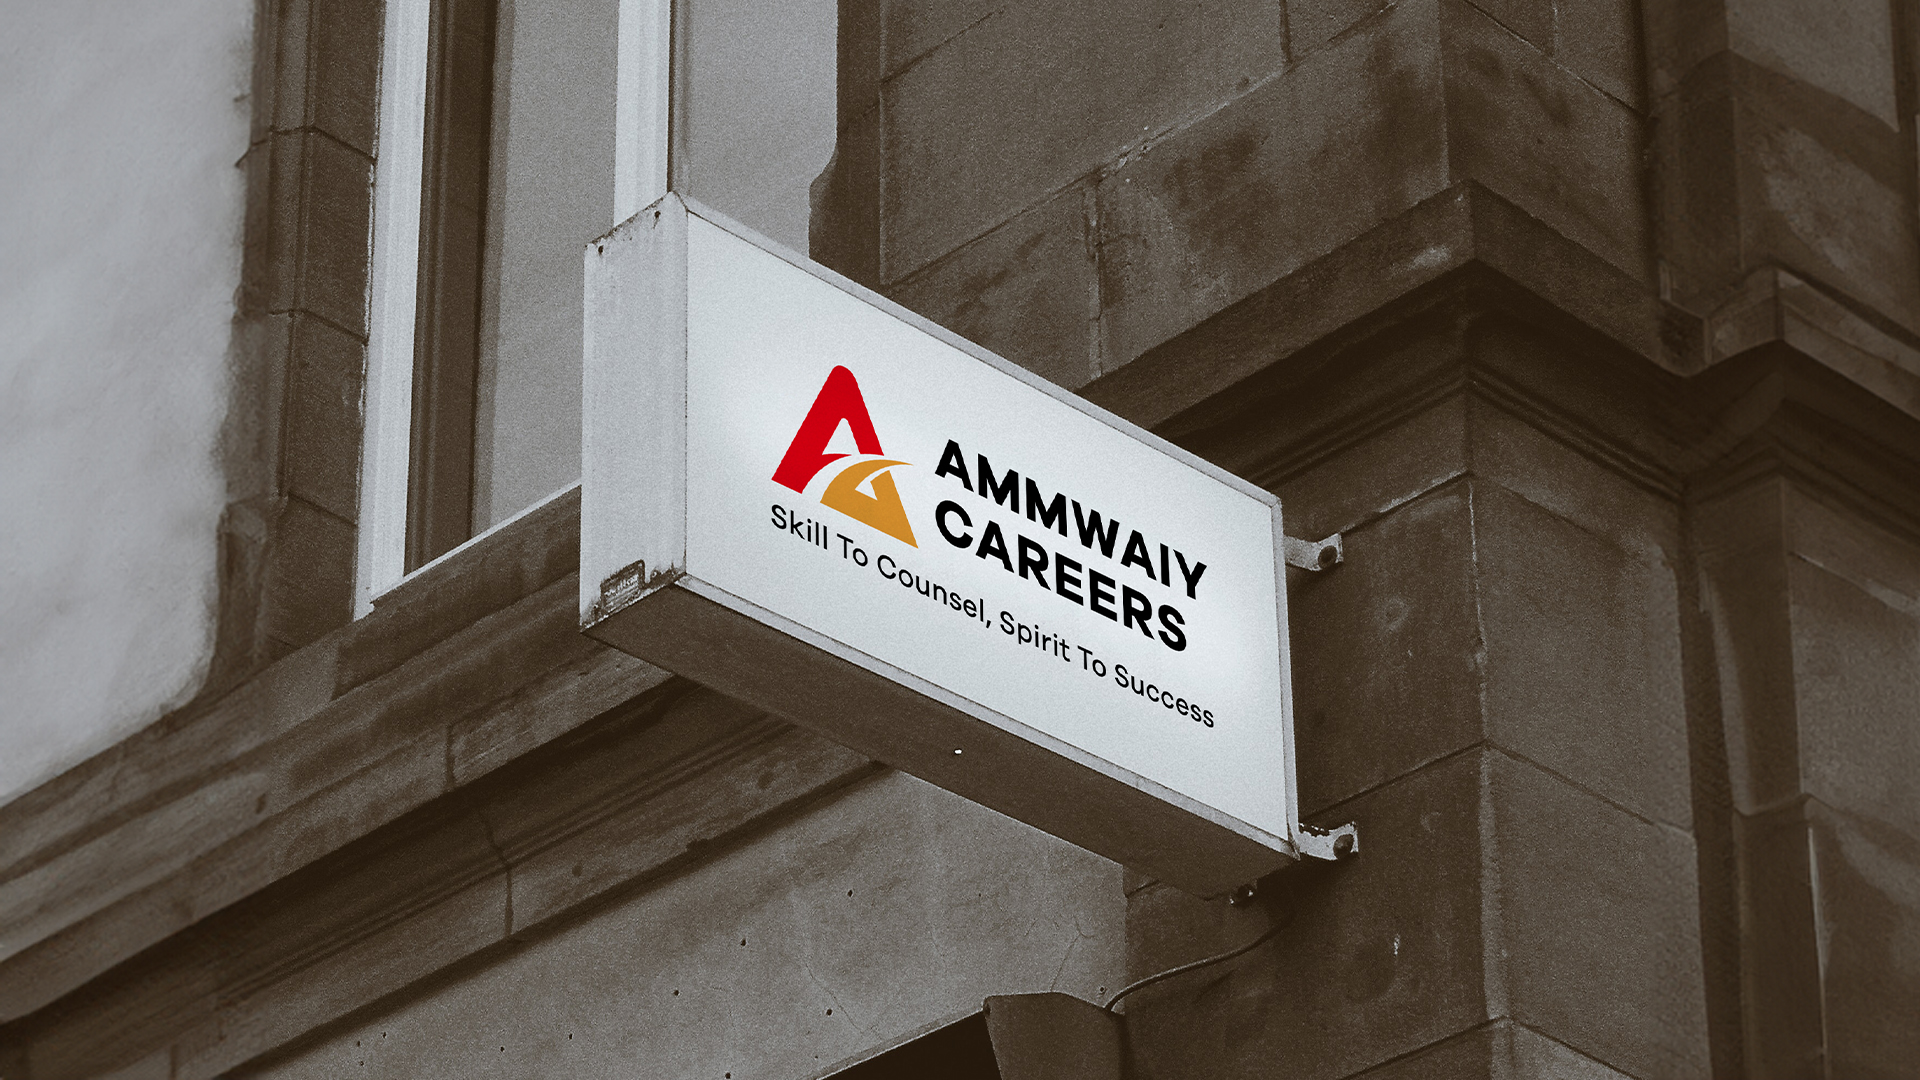 Ammwaiy Careers | Immigration Consultancy Branding And Marketing in Chandigarh | Media Wall Street